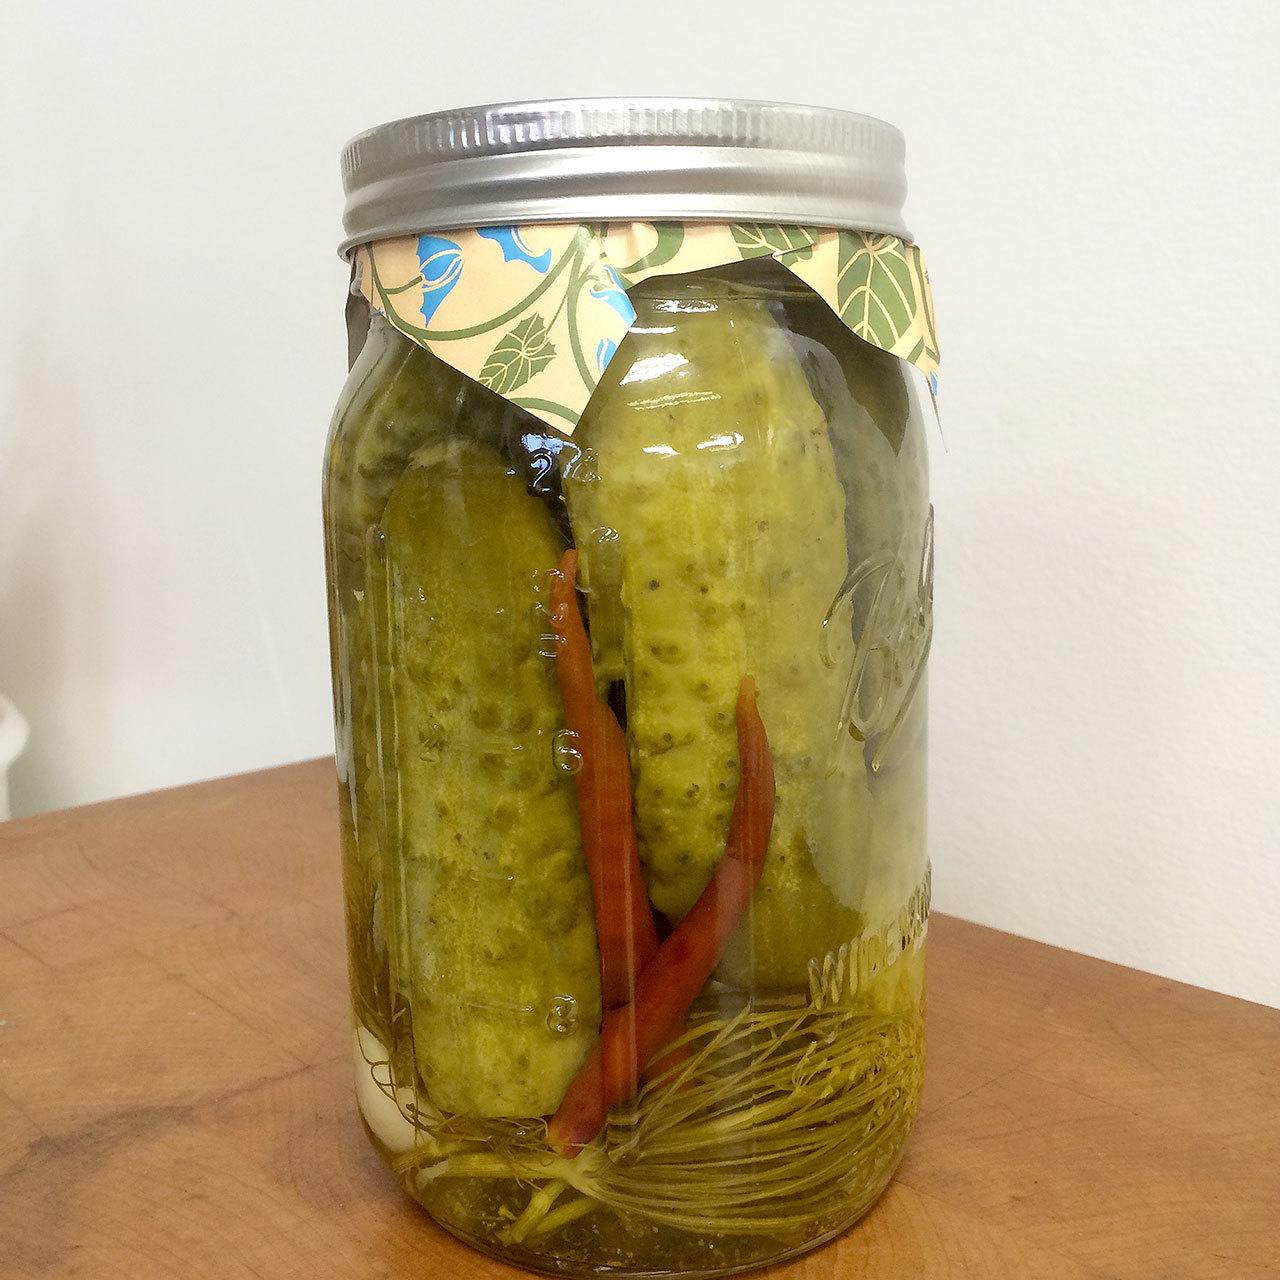 Betsy Wharton can pickle more vegetables than the dill pickles shown here. (Betsy Wharton/for Peninsula Daily News)